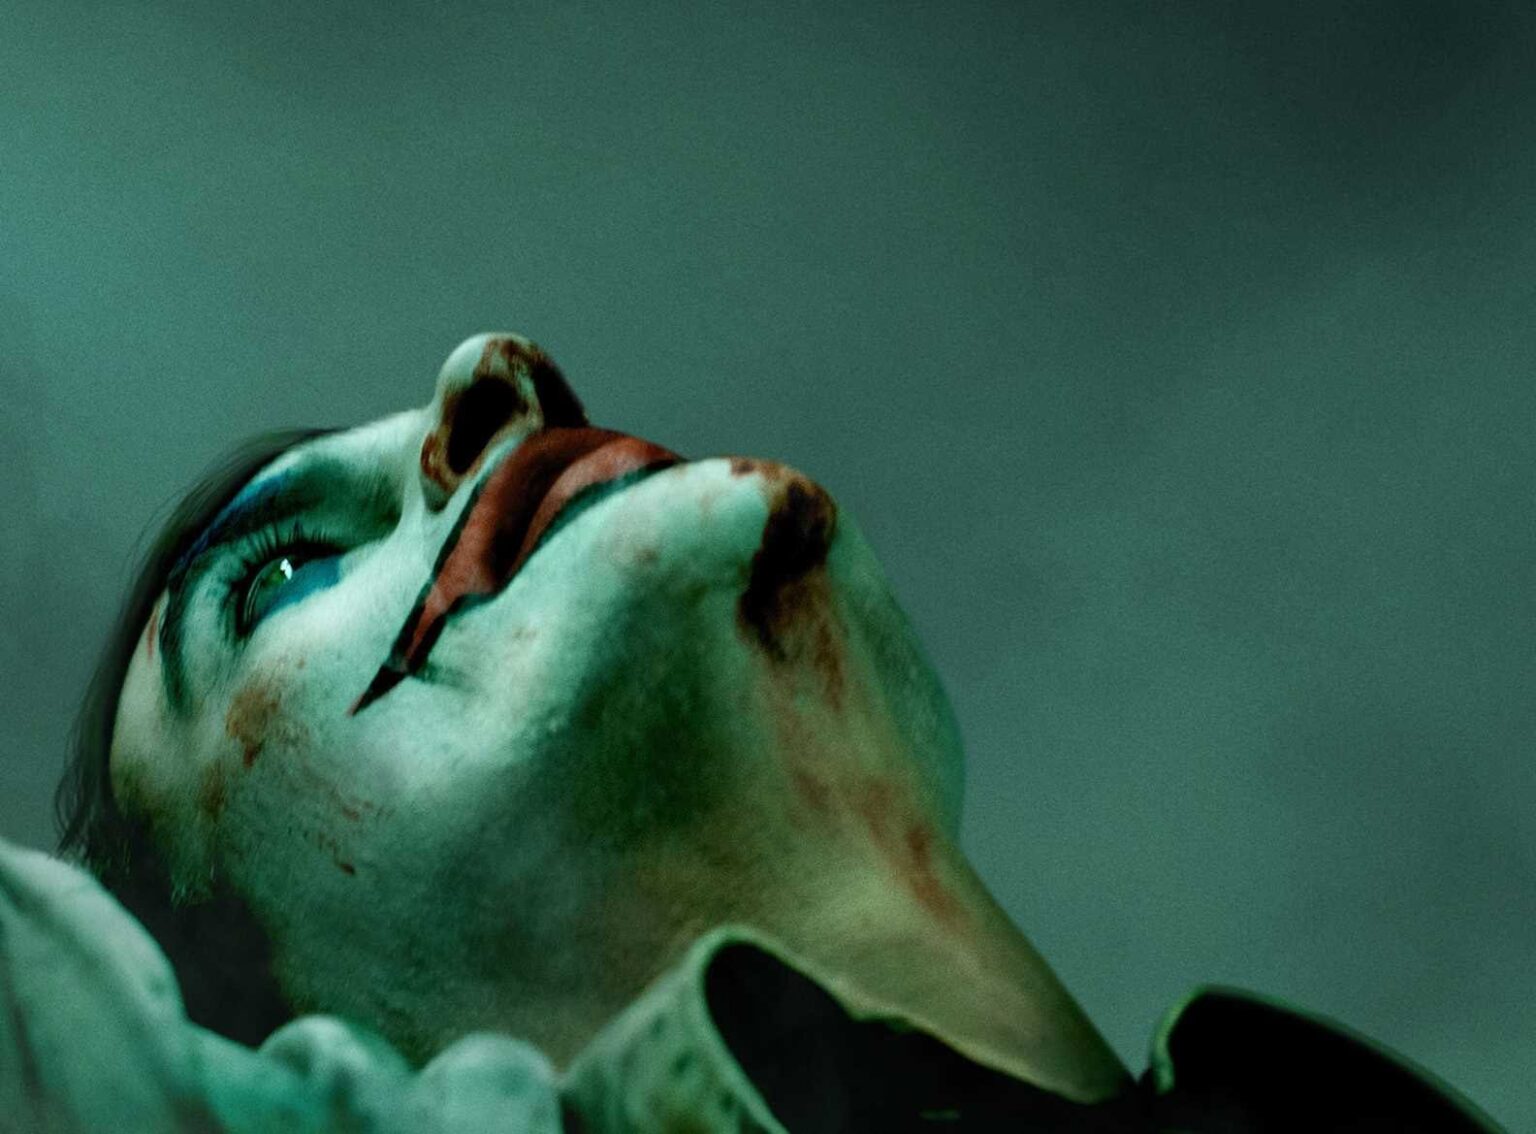 ‘Joker’ doesn’t live up to the hype